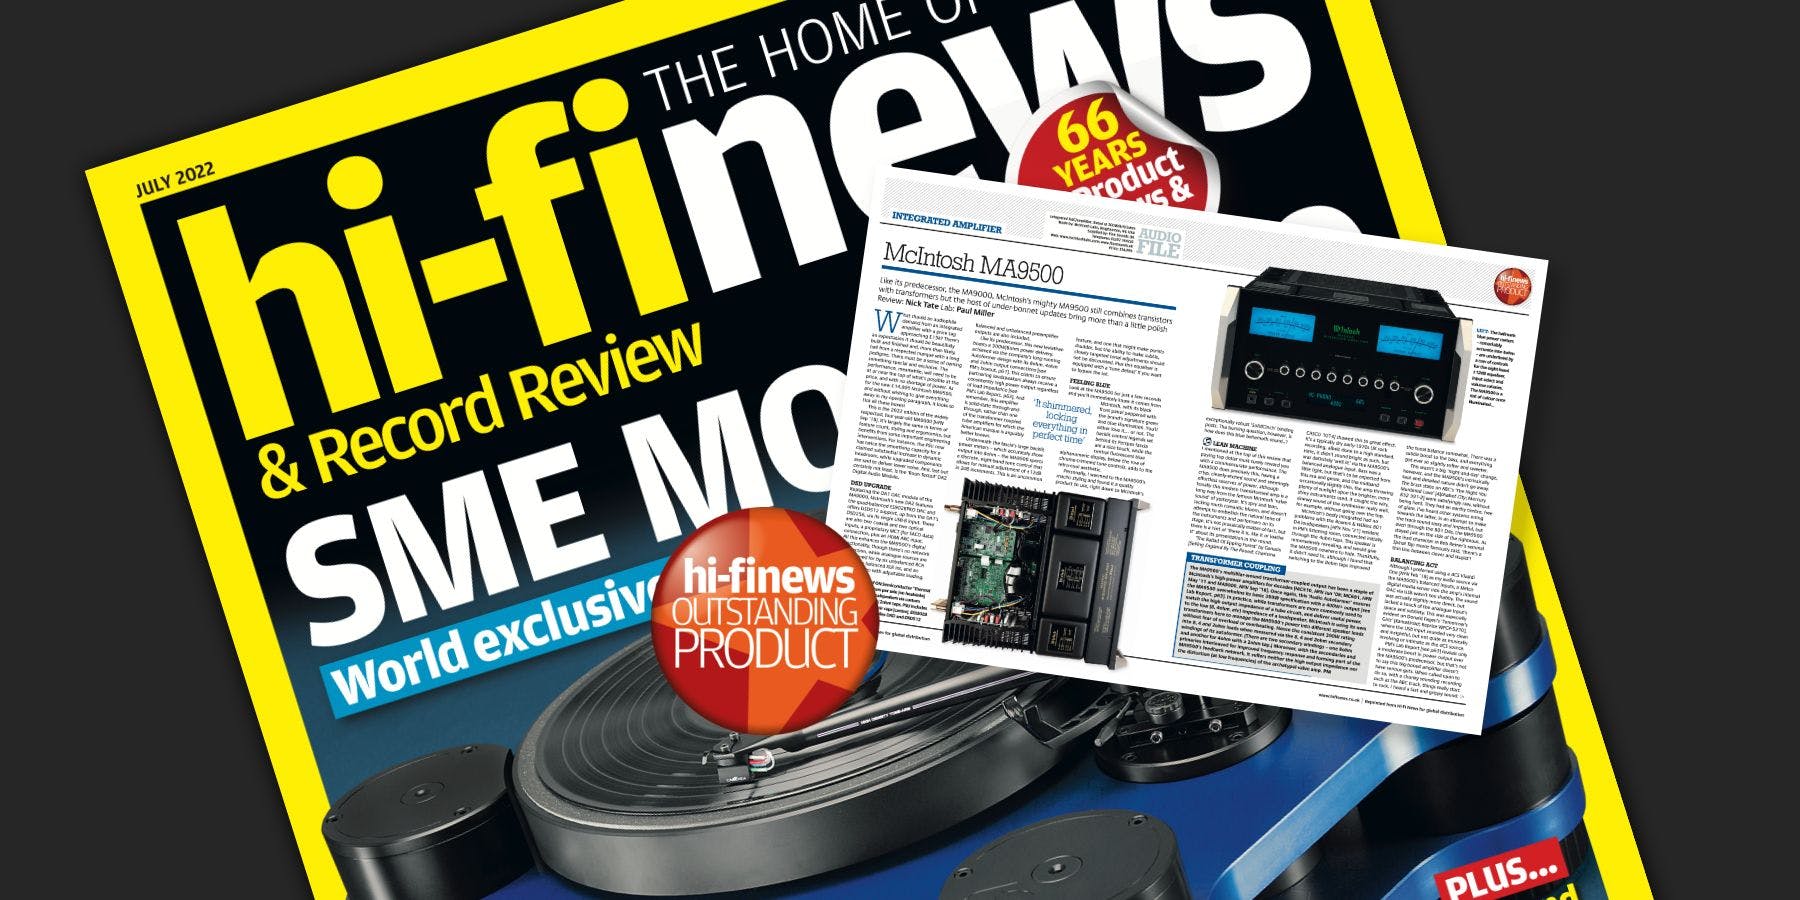 McIntosh MA9500 receives an 'Outstanding Product' award in the July issue of Hi-Fi News